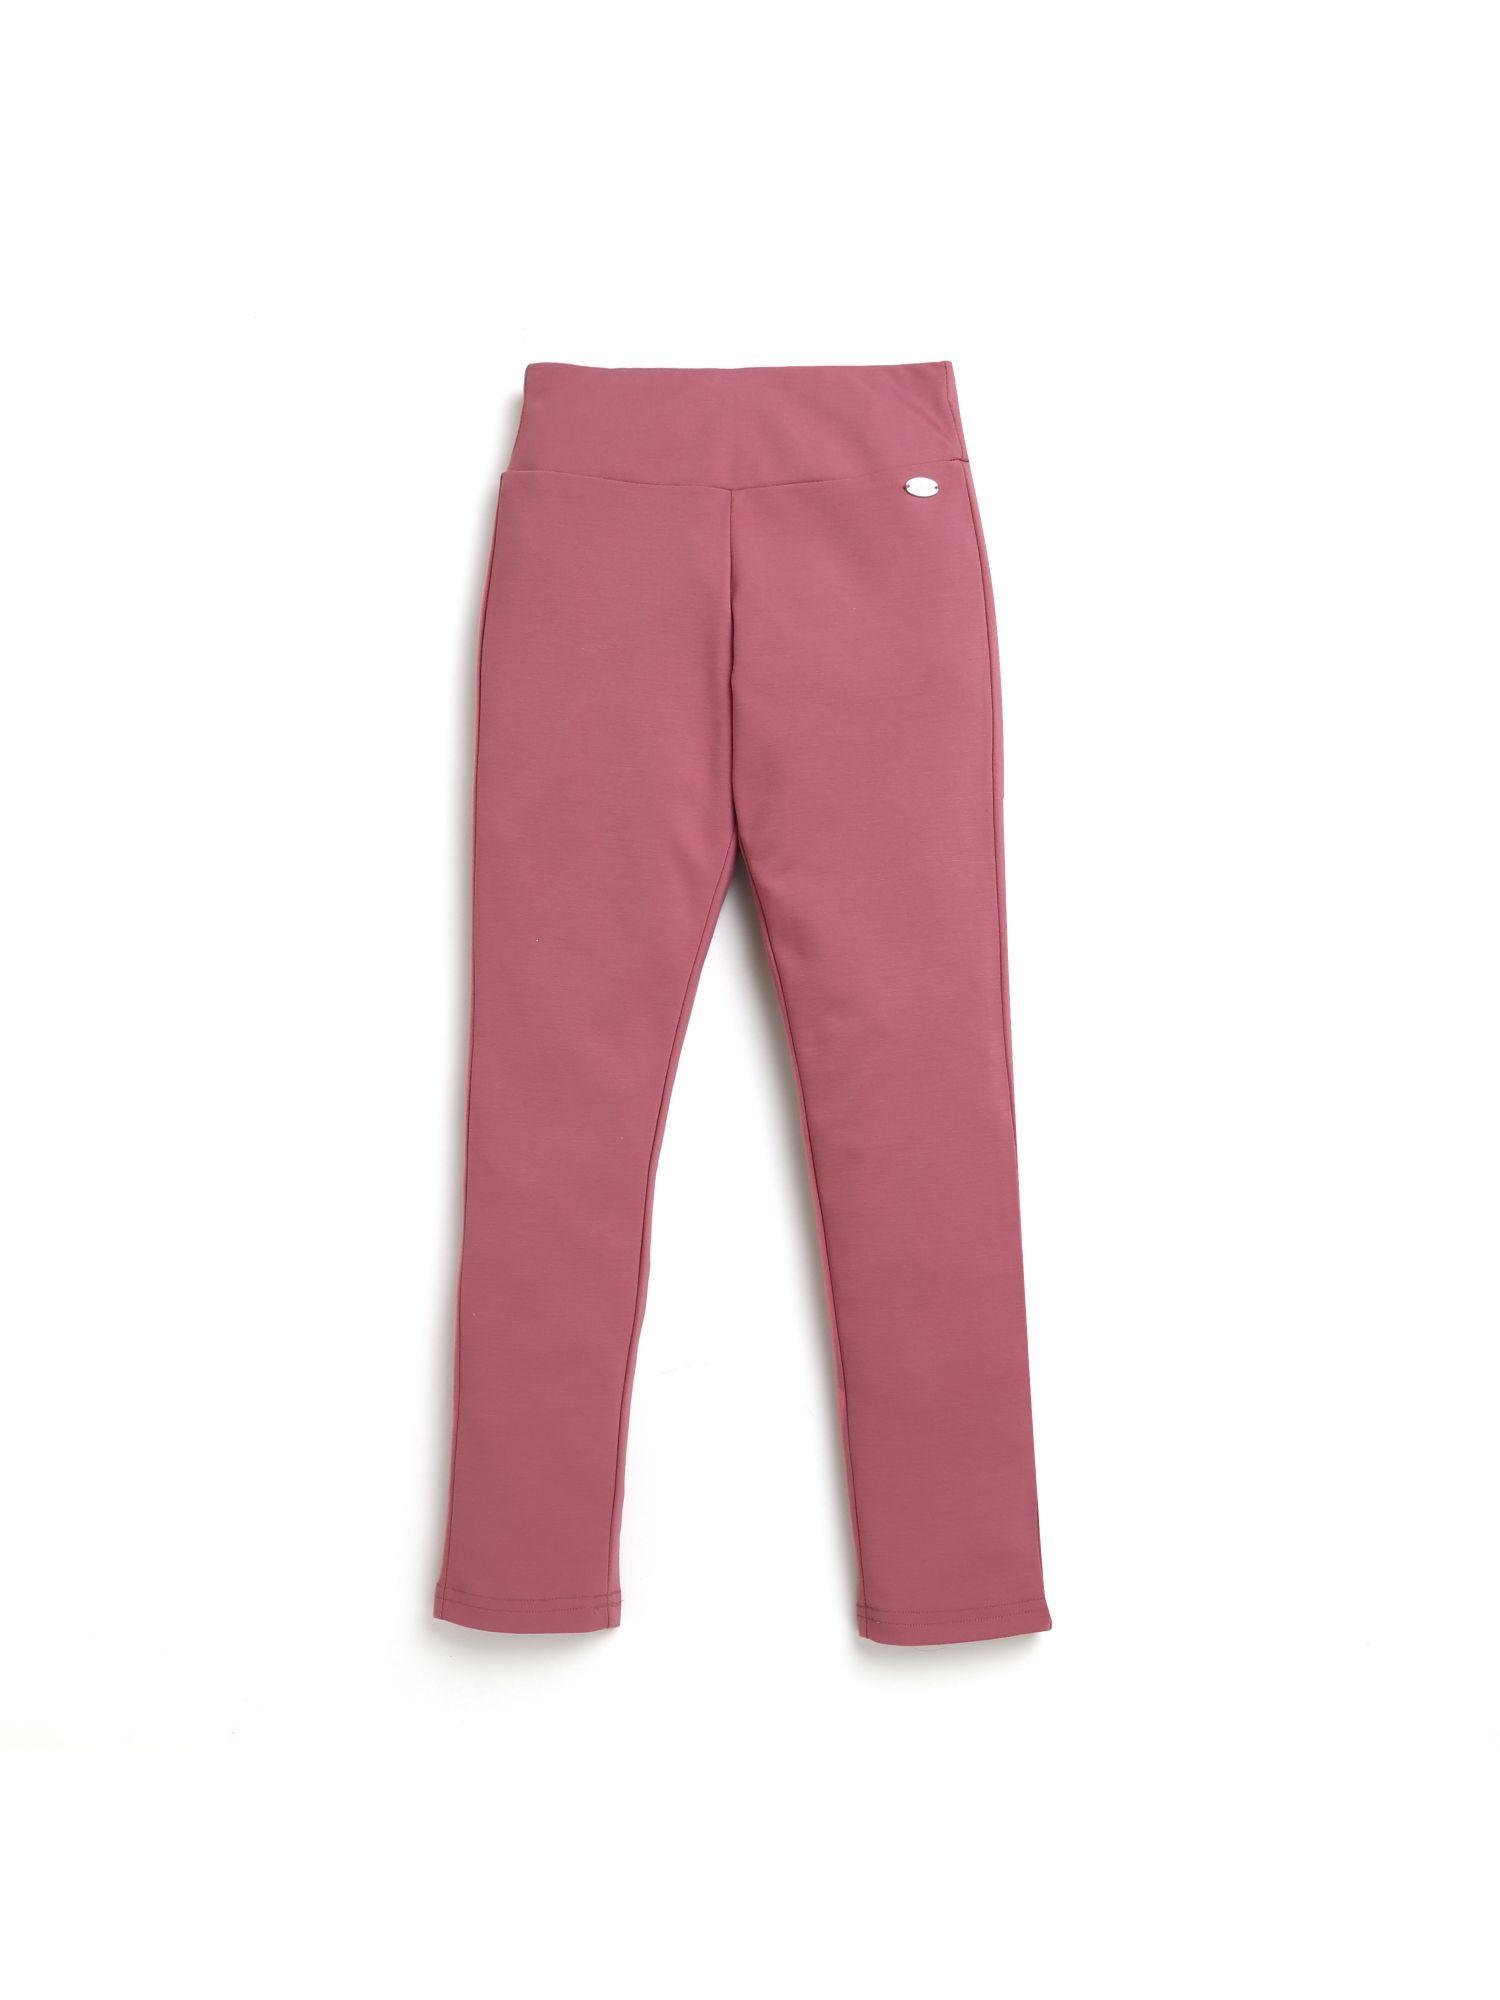 solid jeggings - onion pink